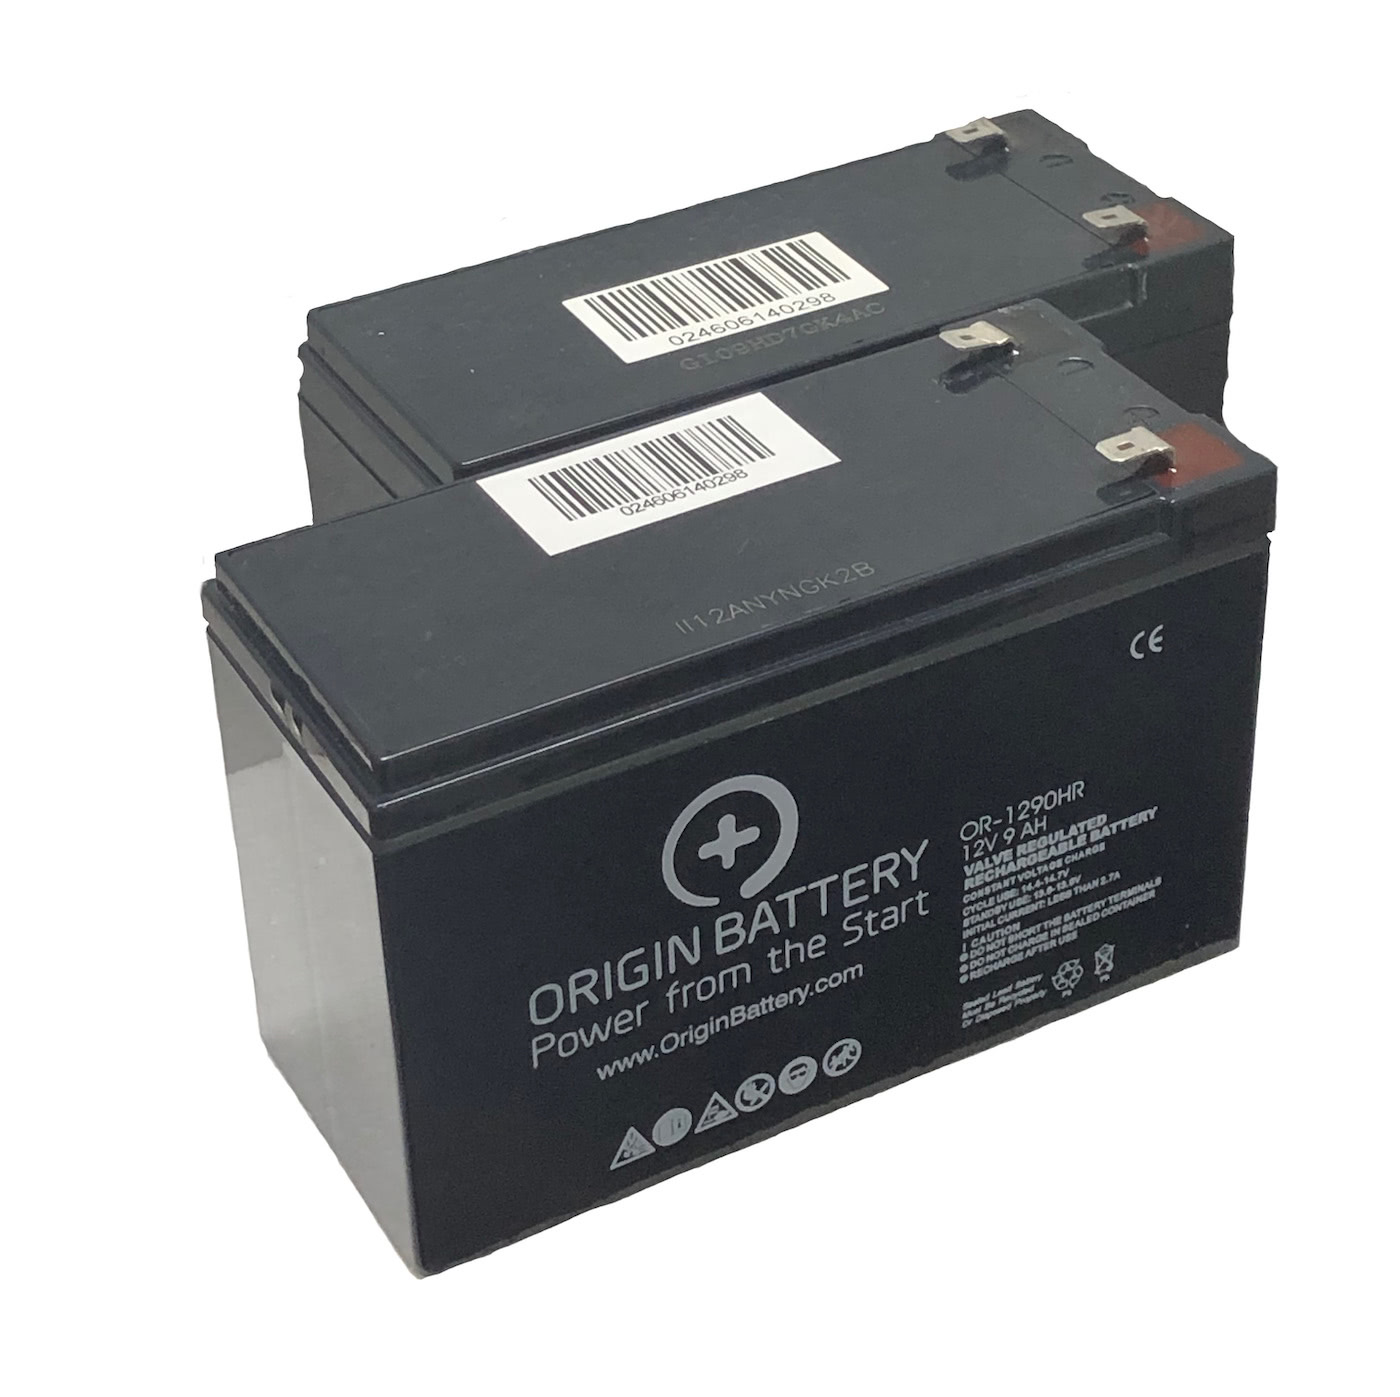 Does this battery fit the e120 razor scooter